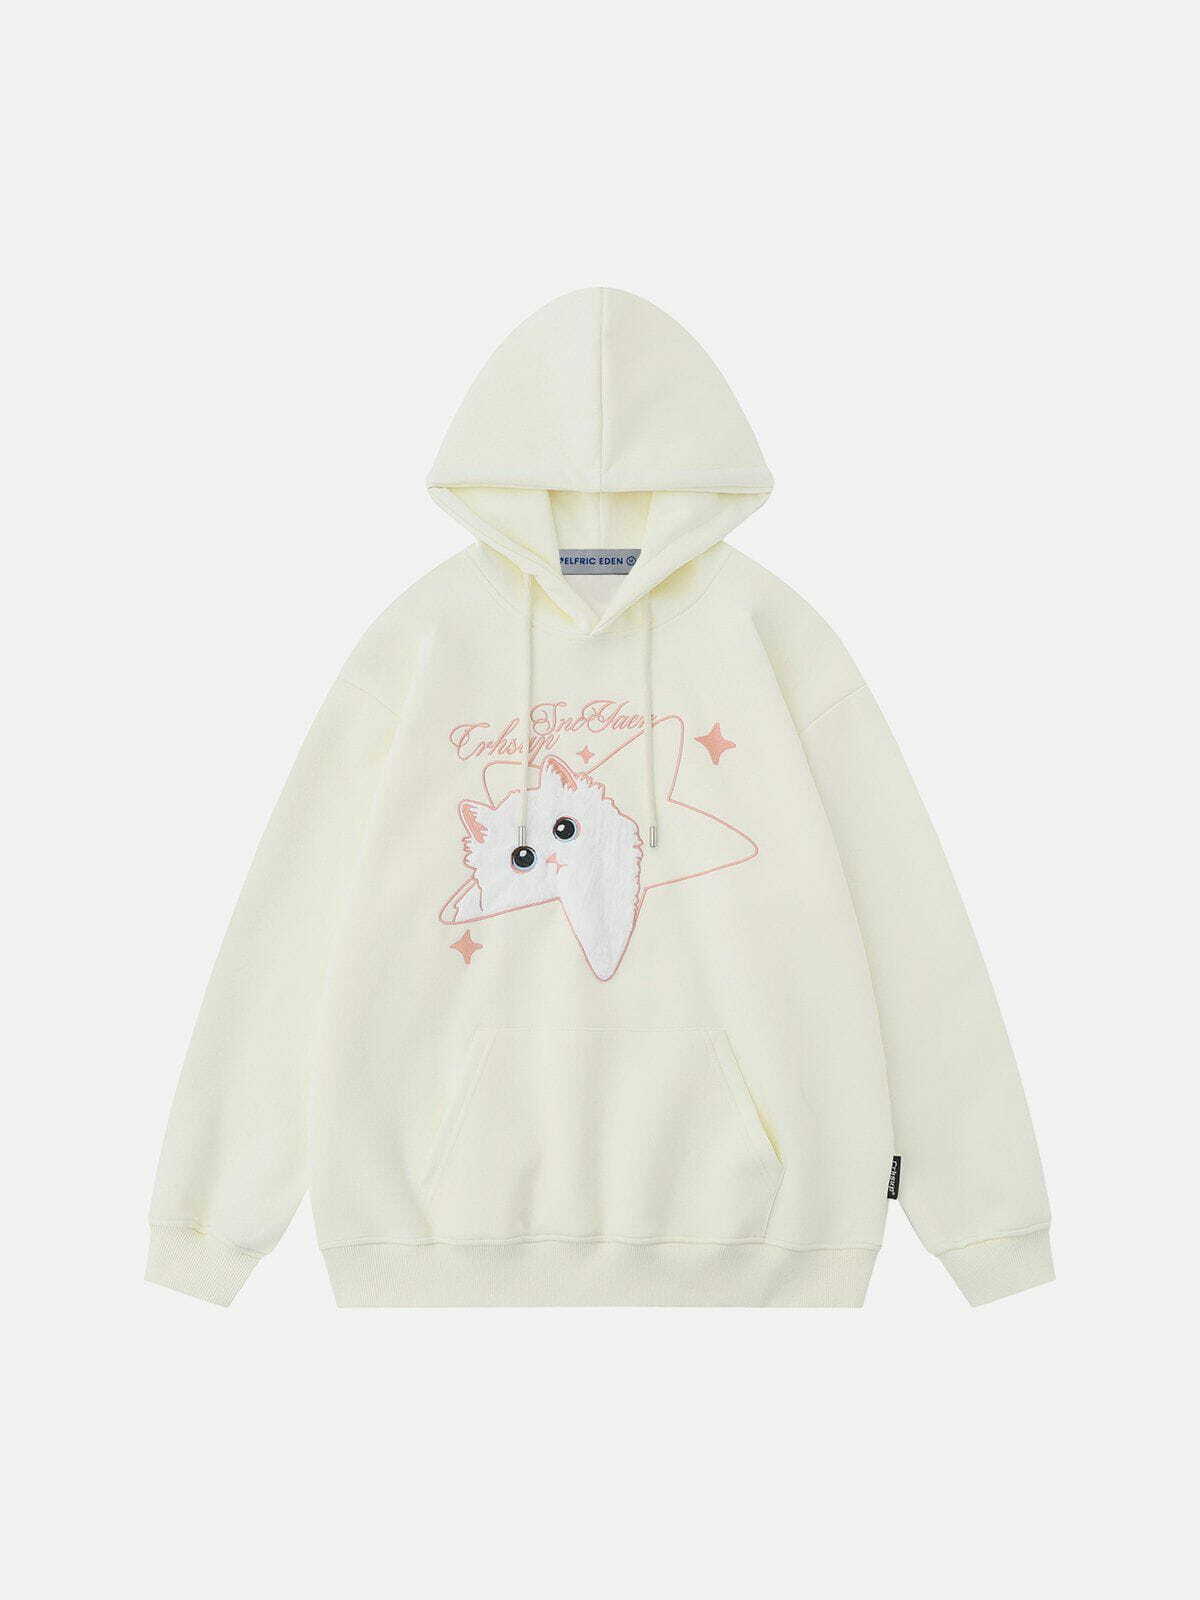 star embroidered cat hoodie edgy streetwear icon 1902